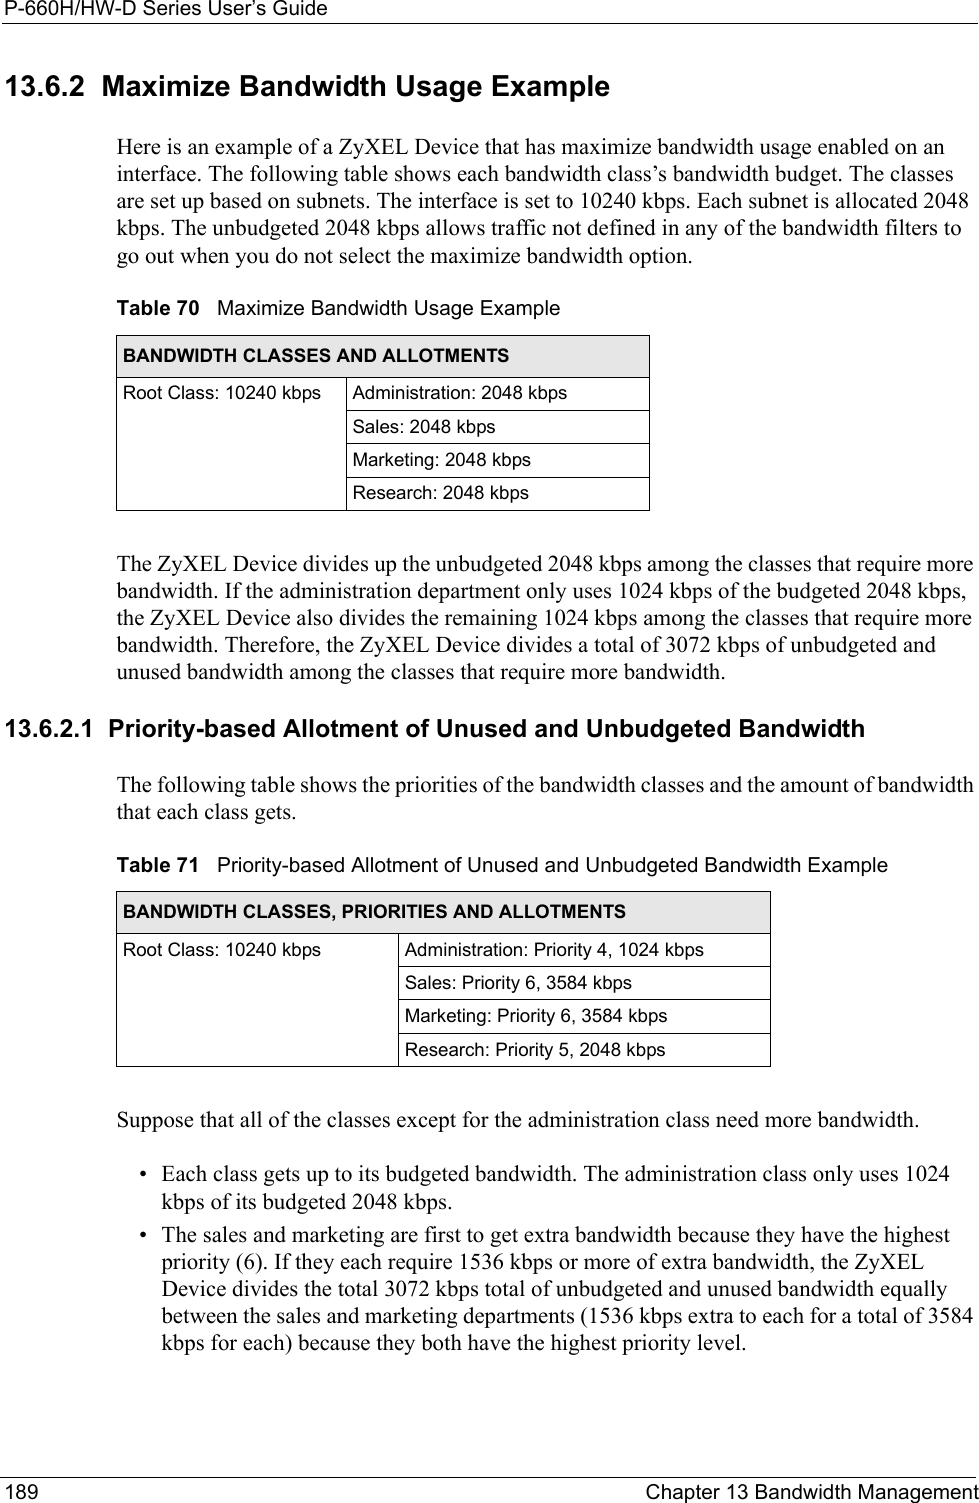 P-660H/HW-D Series User’s Guide189 Chapter 13 Bandwidth Management13.6.2  Maximize Bandwidth Usage ExampleHere is an example of a ZyXEL Device that has maximize bandwidth usage enabled on an interface. The following table shows each bandwidth class’s bandwidth budget. The classes are set up based on subnets. The interface is set to 10240 kbps. Each subnet is allocated 2048 kbps. The unbudgeted 2048 kbps allows traffic not defined in any of the bandwidth filters to go out when you do not select the maximize bandwidth option.The ZyXEL Device divides up the unbudgeted 2048 kbps among the classes that require more bandwidth. If the administration department only uses 1024 kbps of the budgeted 2048 kbps, the ZyXEL Device also divides the remaining 1024 kbps among the classes that require more bandwidth. Therefore, the ZyXEL Device divides a total of 3072 kbps of unbudgeted and unused bandwidth among the classes that require more bandwidth. 13.6.2.1  Priority-based Allotment of Unused and Unbudgeted BandwidthThe following table shows the priorities of the bandwidth classes and the amount of bandwidth that each class gets.Suppose that all of the classes except for the administration class need more bandwidth.• Each class gets up to its budgeted bandwidth. The administration class only uses 1024 kbps of its budgeted 2048 kbps. • The sales and marketing are first to get extra bandwidth because they have the highest priority (6). If they each require 1536 kbps or more of extra bandwidth, the ZyXEL Device divides the total 3072 kbps total of unbudgeted and unused bandwidth equally between the sales and marketing departments (1536 kbps extra to each for a total of 3584 kbps for each) because they both have the highest priority level. Table 70   Maximize Bandwidth Usage ExampleBANDWIDTH CLASSES AND ALLOTMENTSRoot Class: 10240 kbps Administration: 2048 kbpsSales: 2048 kbpsMarketing: 2048 kbpsResearch: 2048 kbpsTable 71   Priority-based Allotment of Unused and Unbudgeted Bandwidth ExampleBANDWIDTH CLASSES, PRIORITIES AND ALLOTMENTSRoot Class: 10240 kbps Administration: Priority 4, 1024 kbpsSales: Priority 6, 3584 kbpsMarketing: Priority 6, 3584 kbpsResearch: Priority 5, 2048 kbps